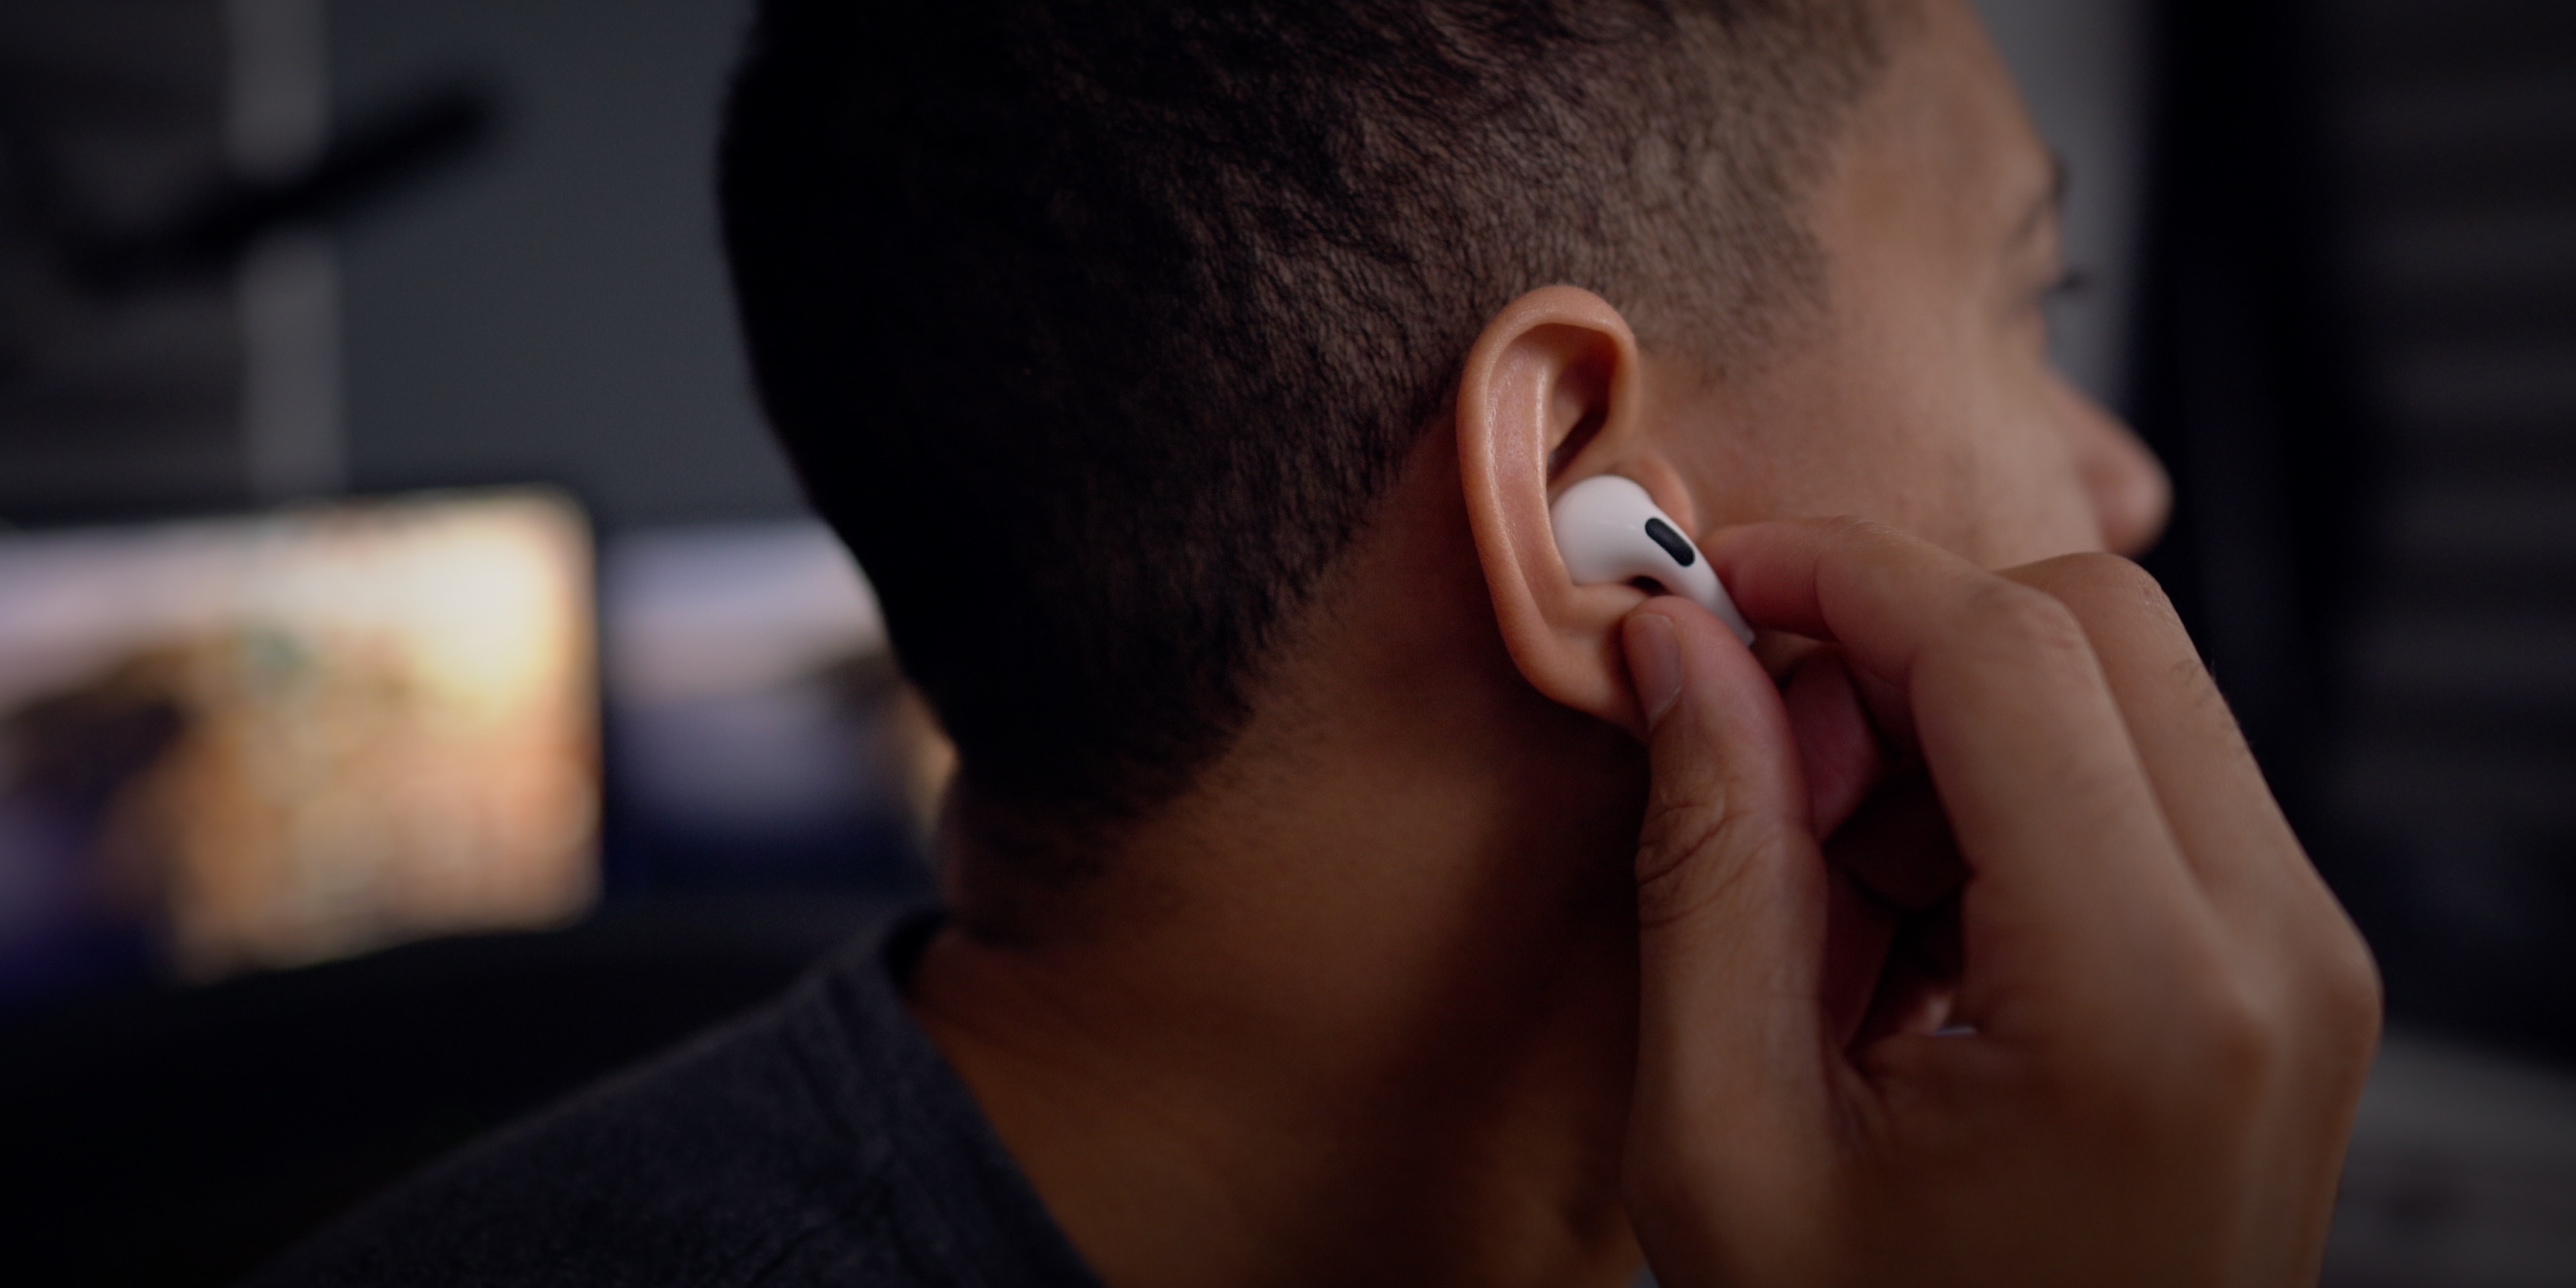 Apple releases support advice AirPods Pro users with crackling audio and noise cancellation issues - 9to5Mac